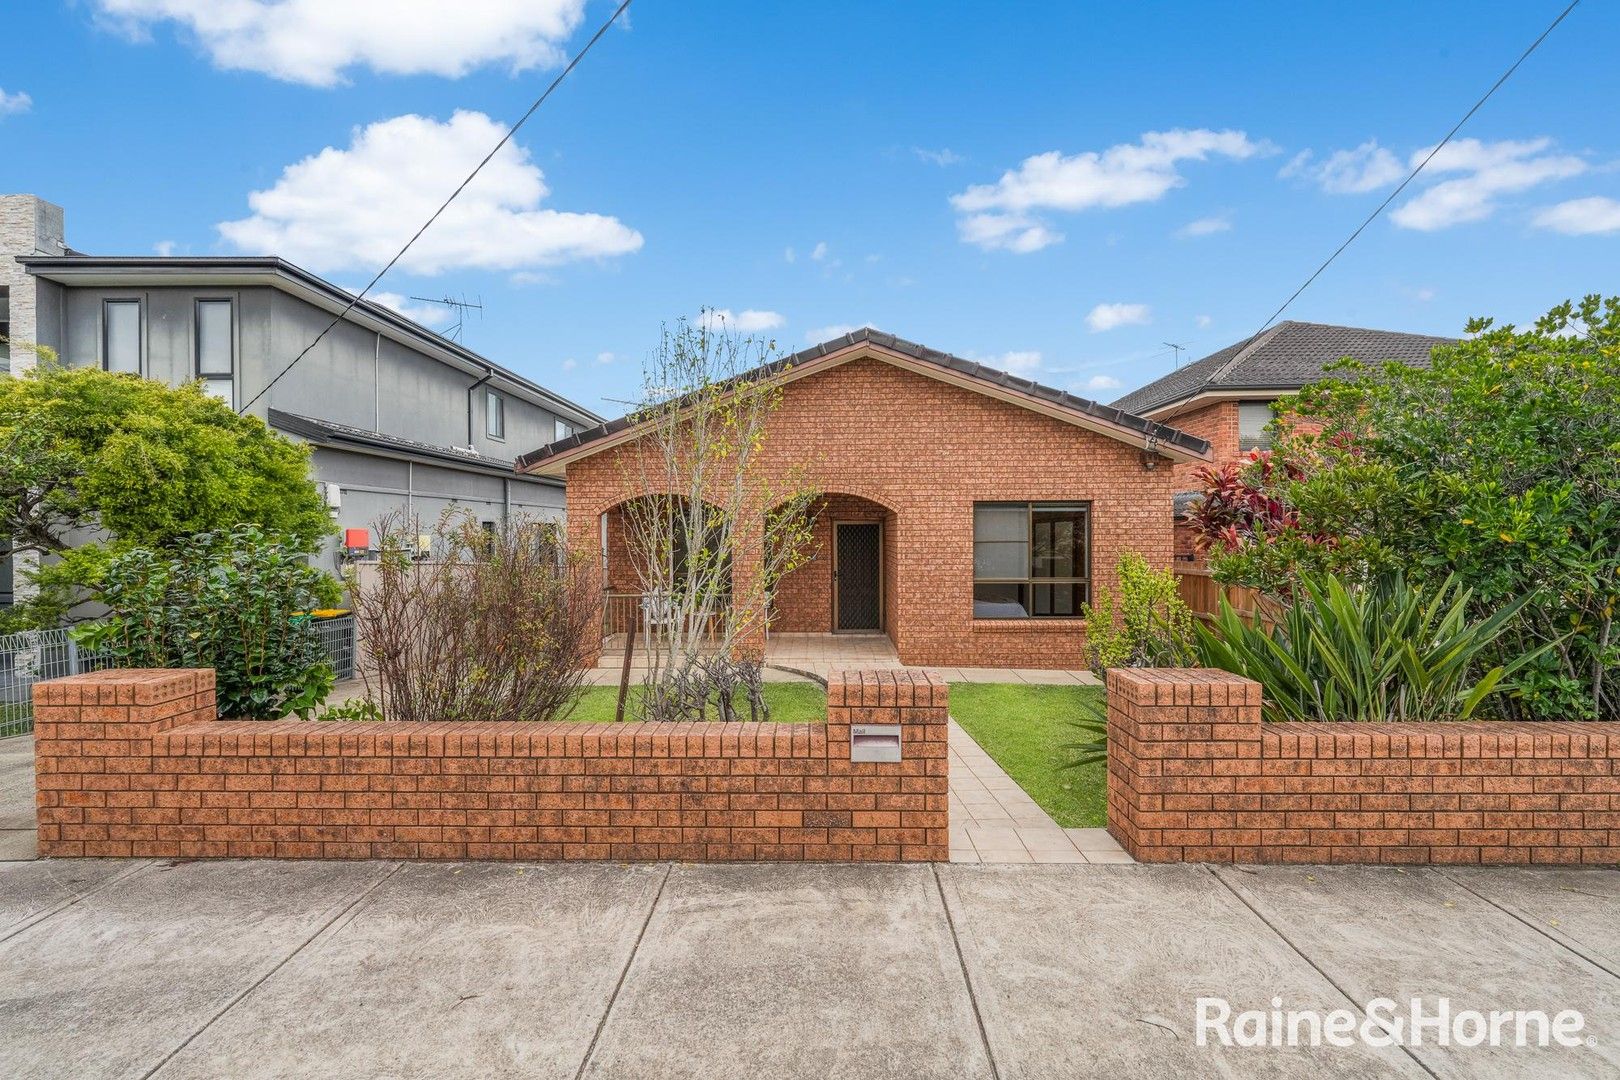 3 bedrooms House in 19 Lea Ave RUSSELL LEA NSW, 2046